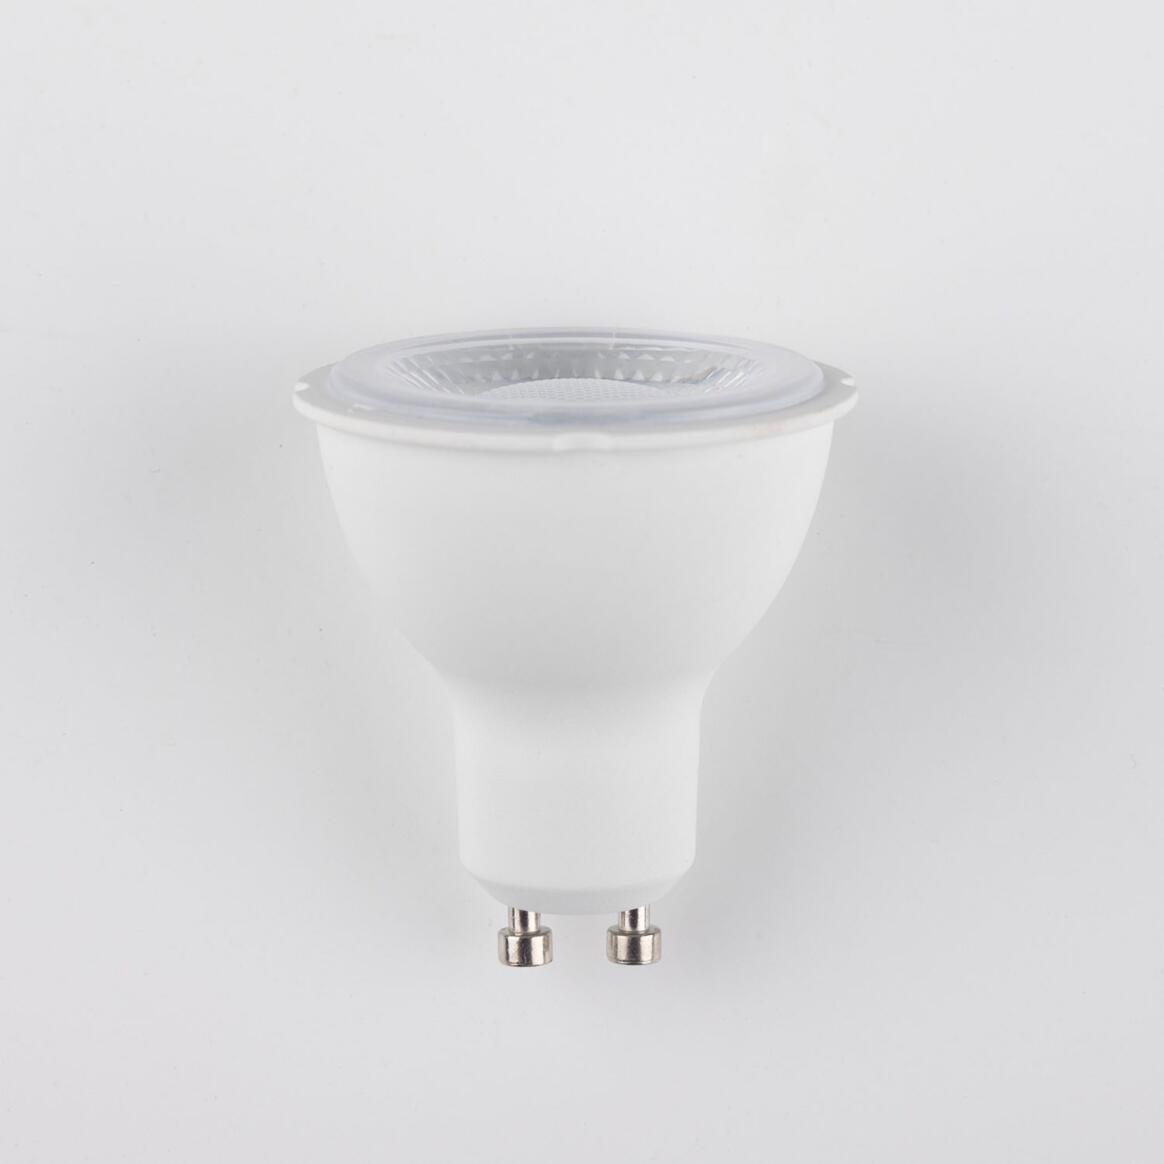 GU10 LED Bulb Spot Light Dimmable 5W 2700k 380lm 2" main product image